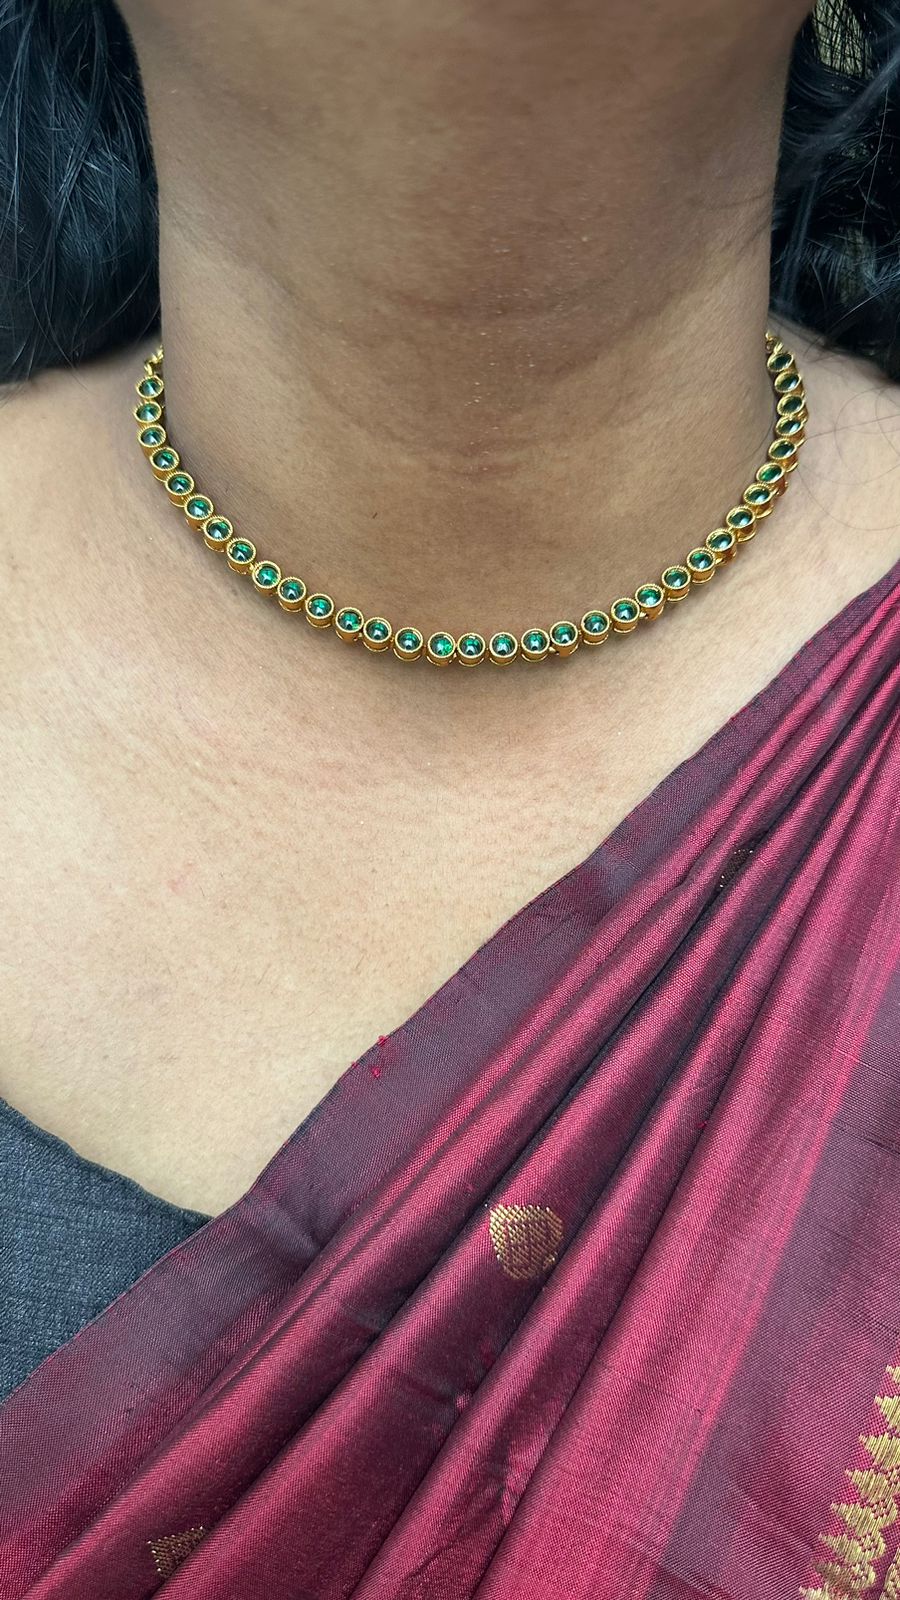 Small Green Choker Necklace - N1320